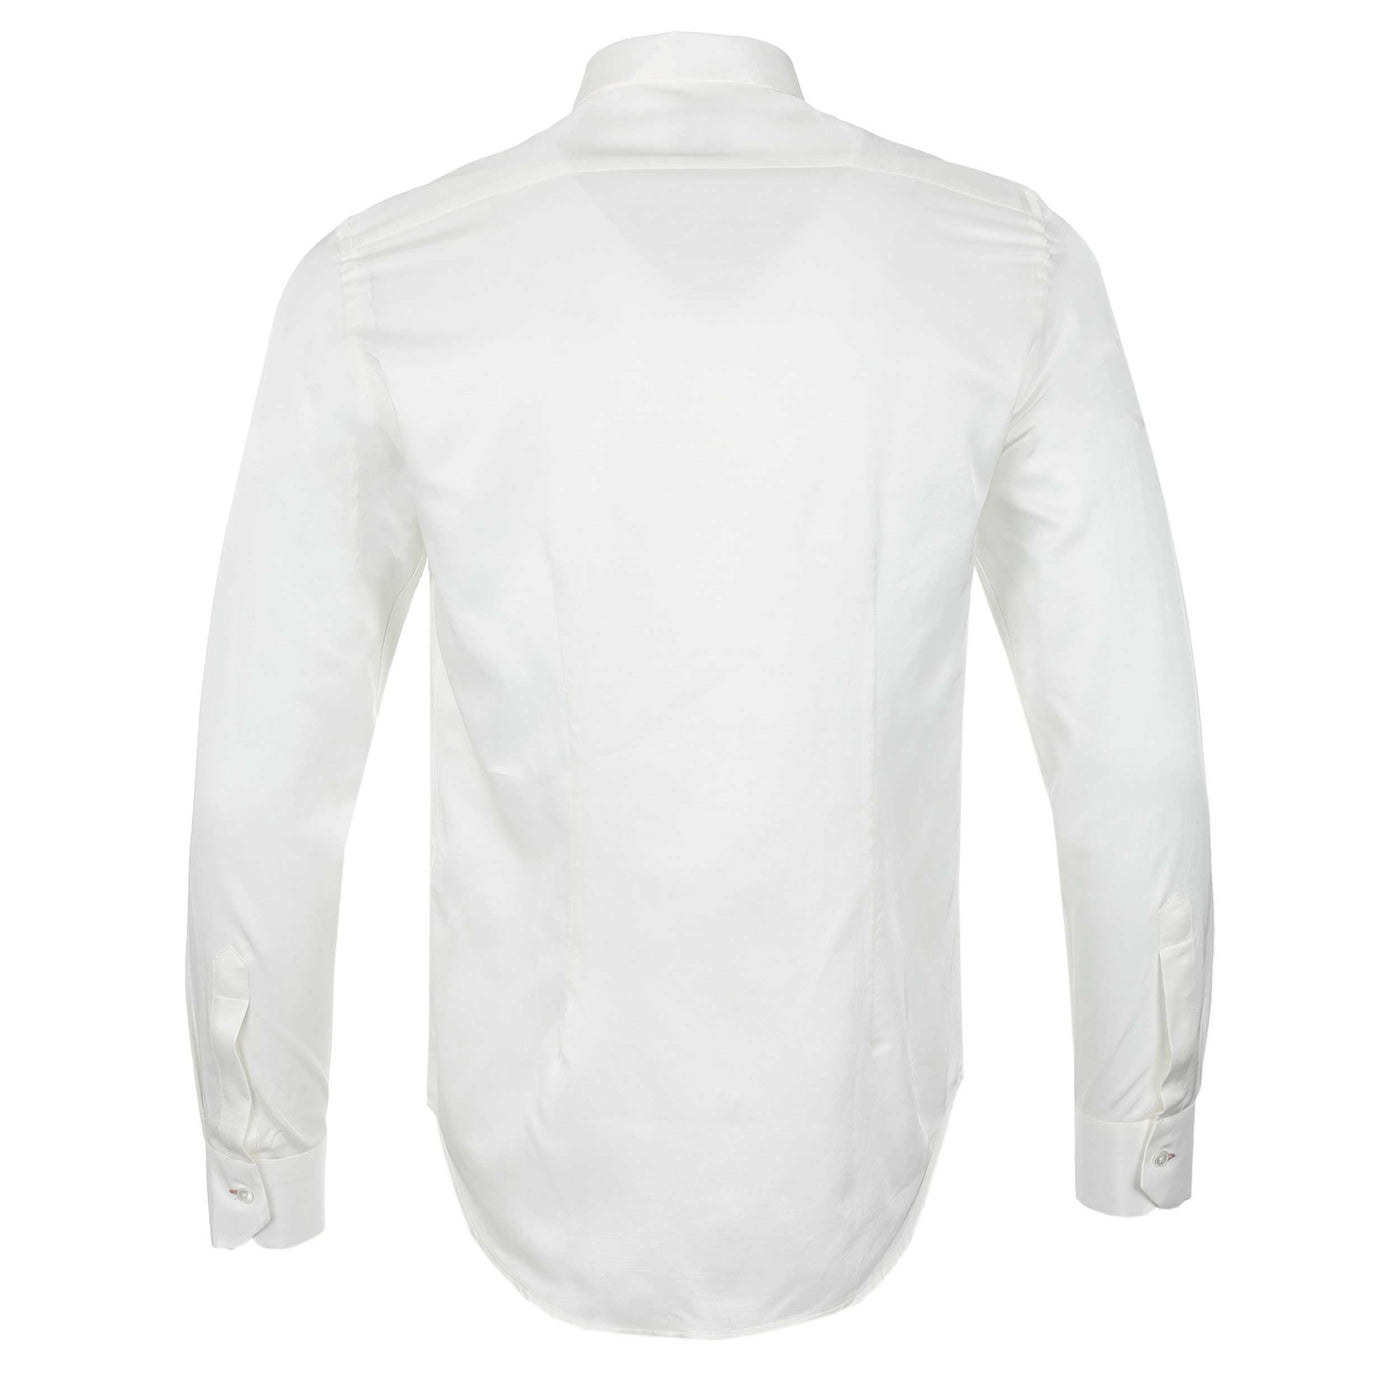 Paul Smith Slim Fit Shirt in Ivory Back